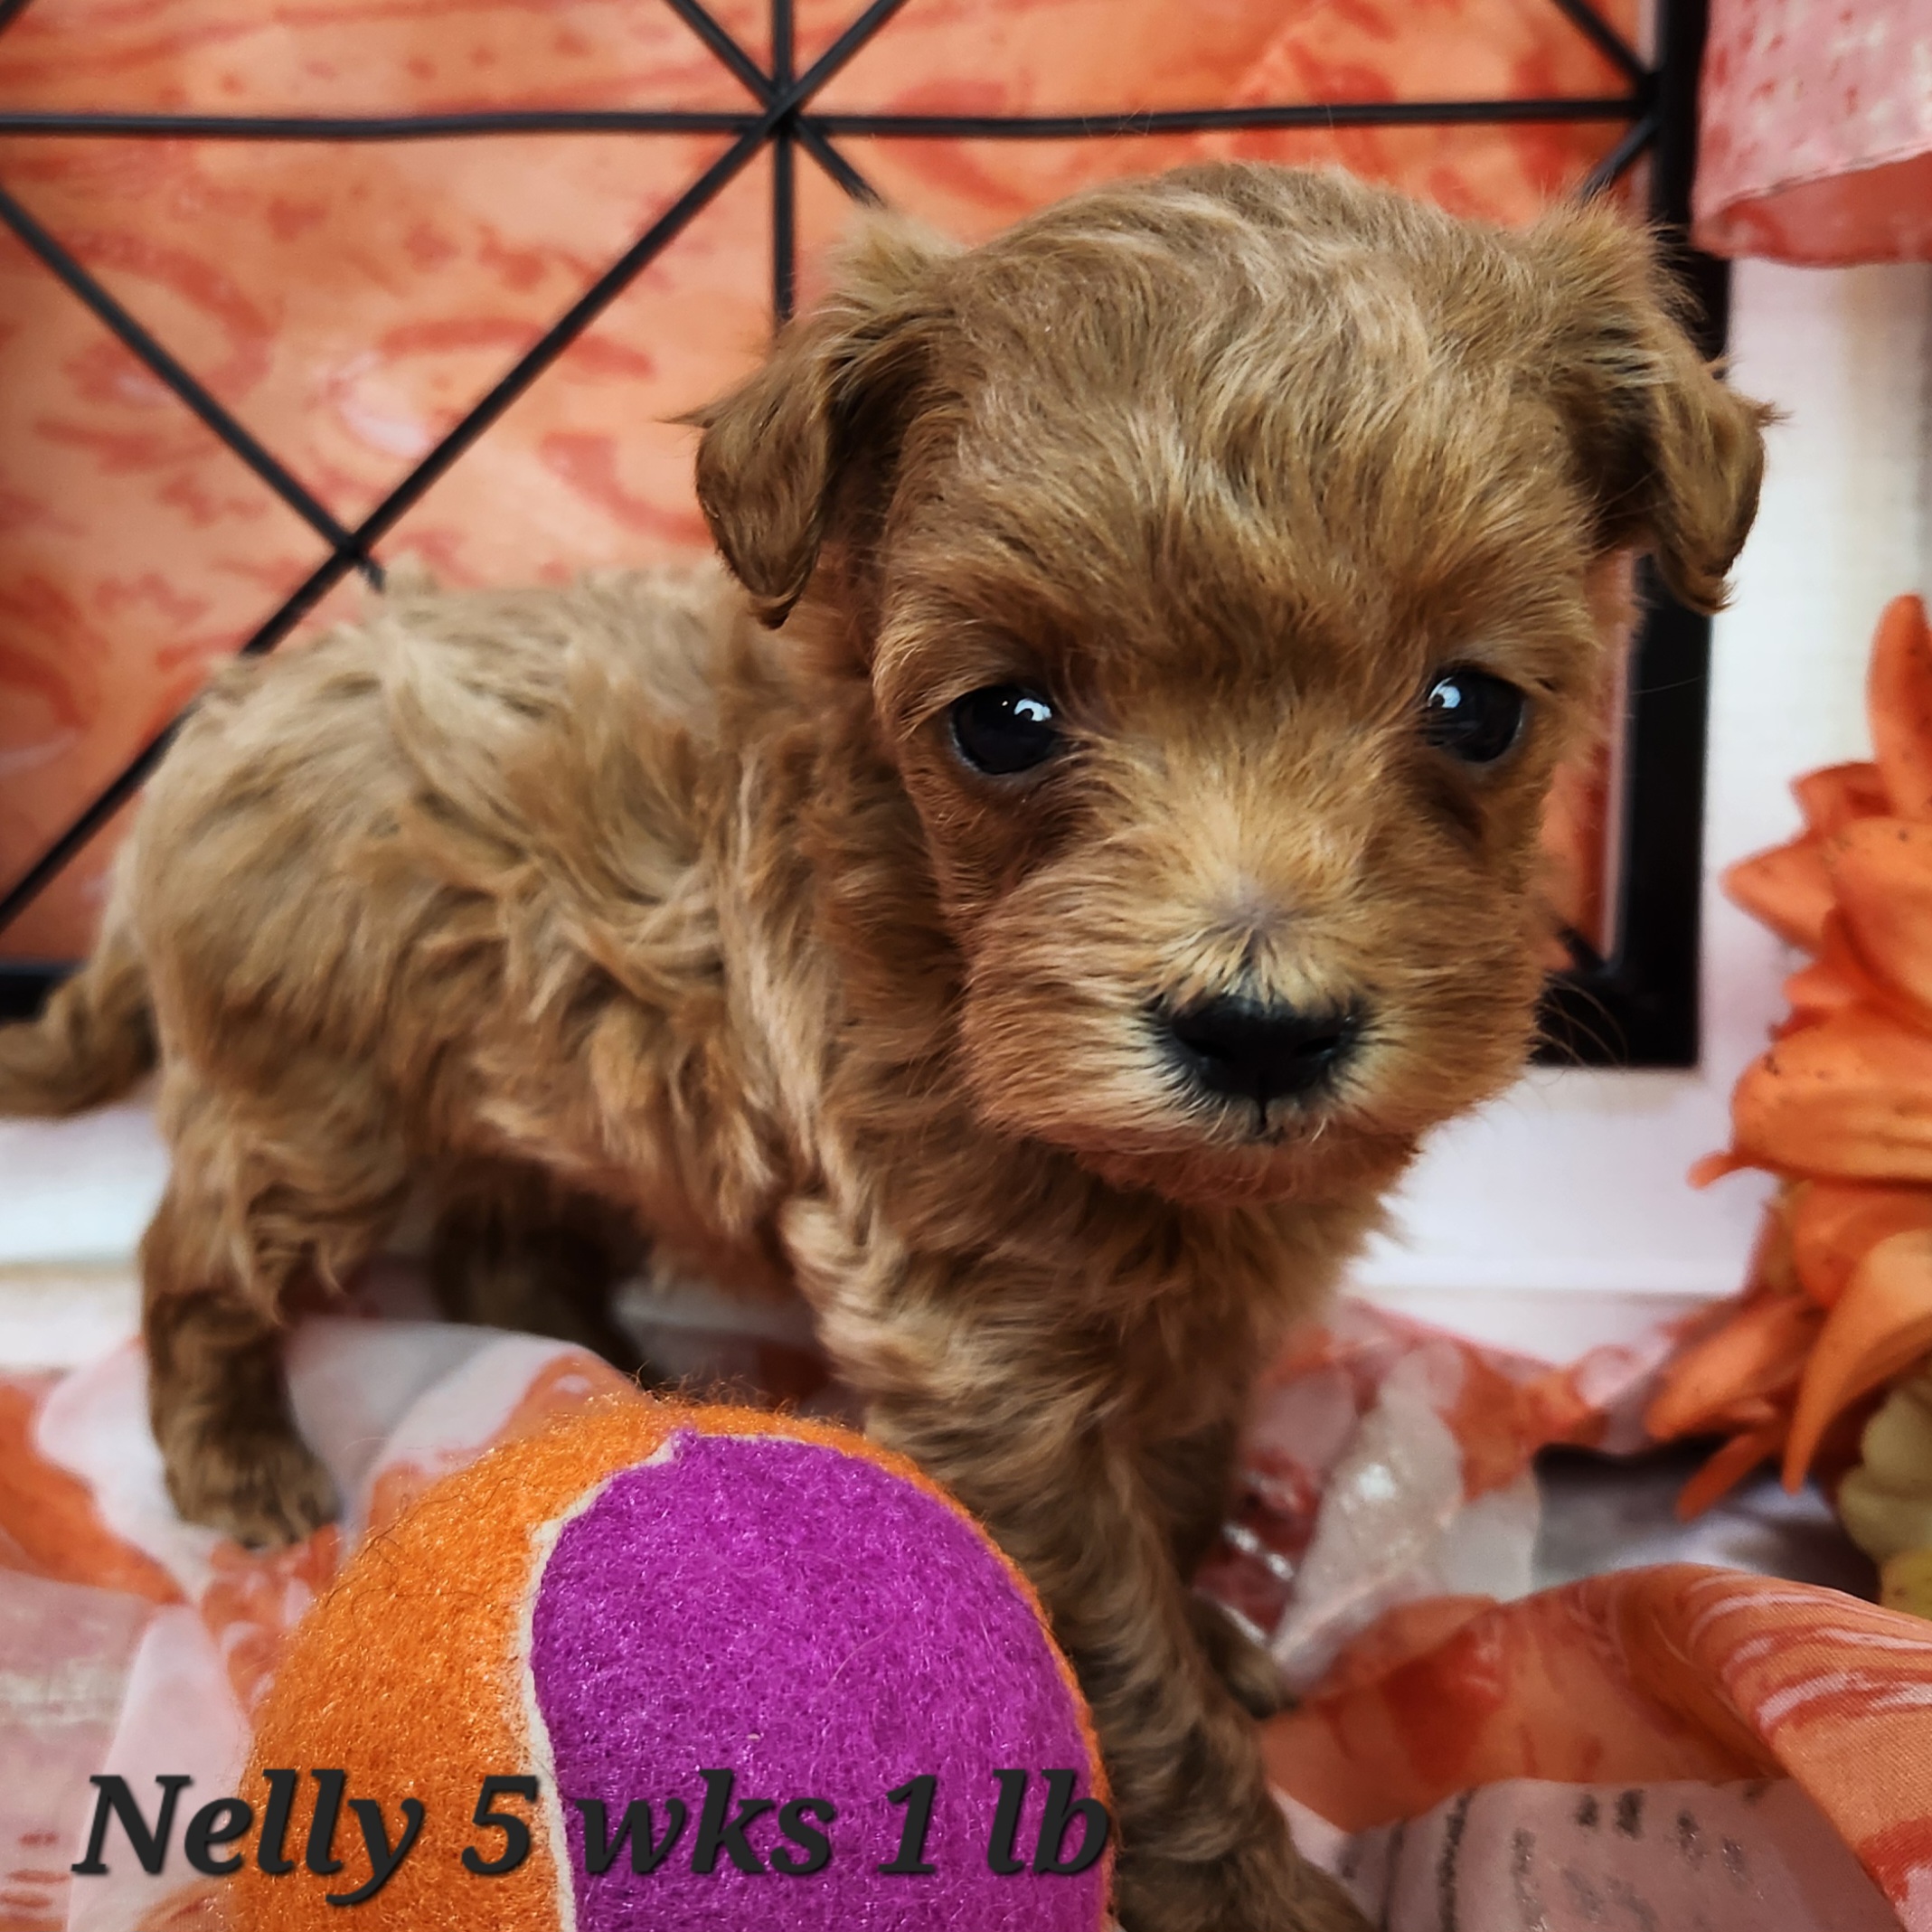 nelly red nebraska micro f1bb goldendoodle nationwide travel